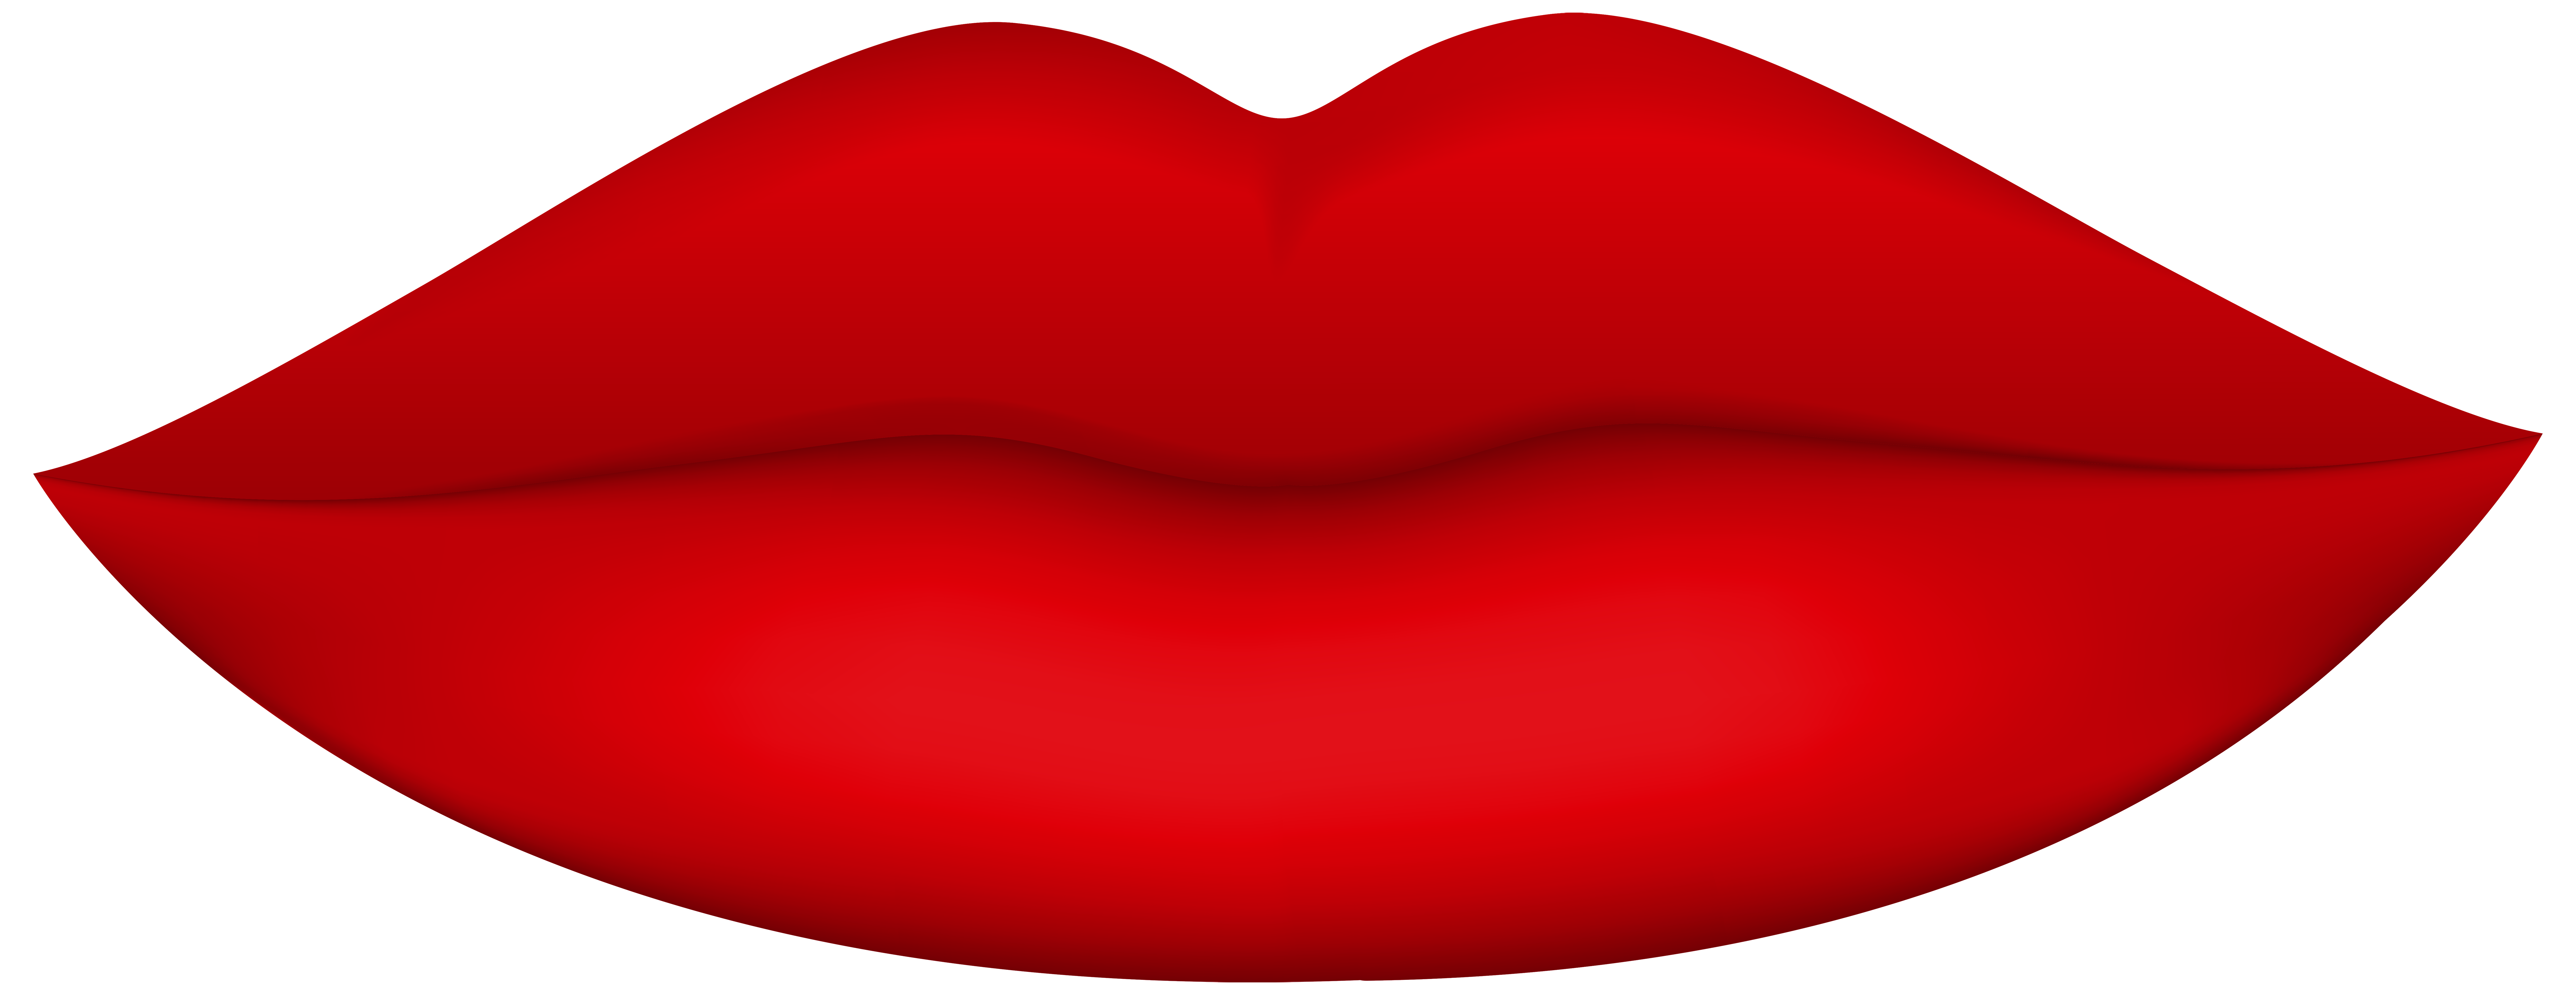 Lips clipart mout, Lips mout Transparent FREE for download on ...